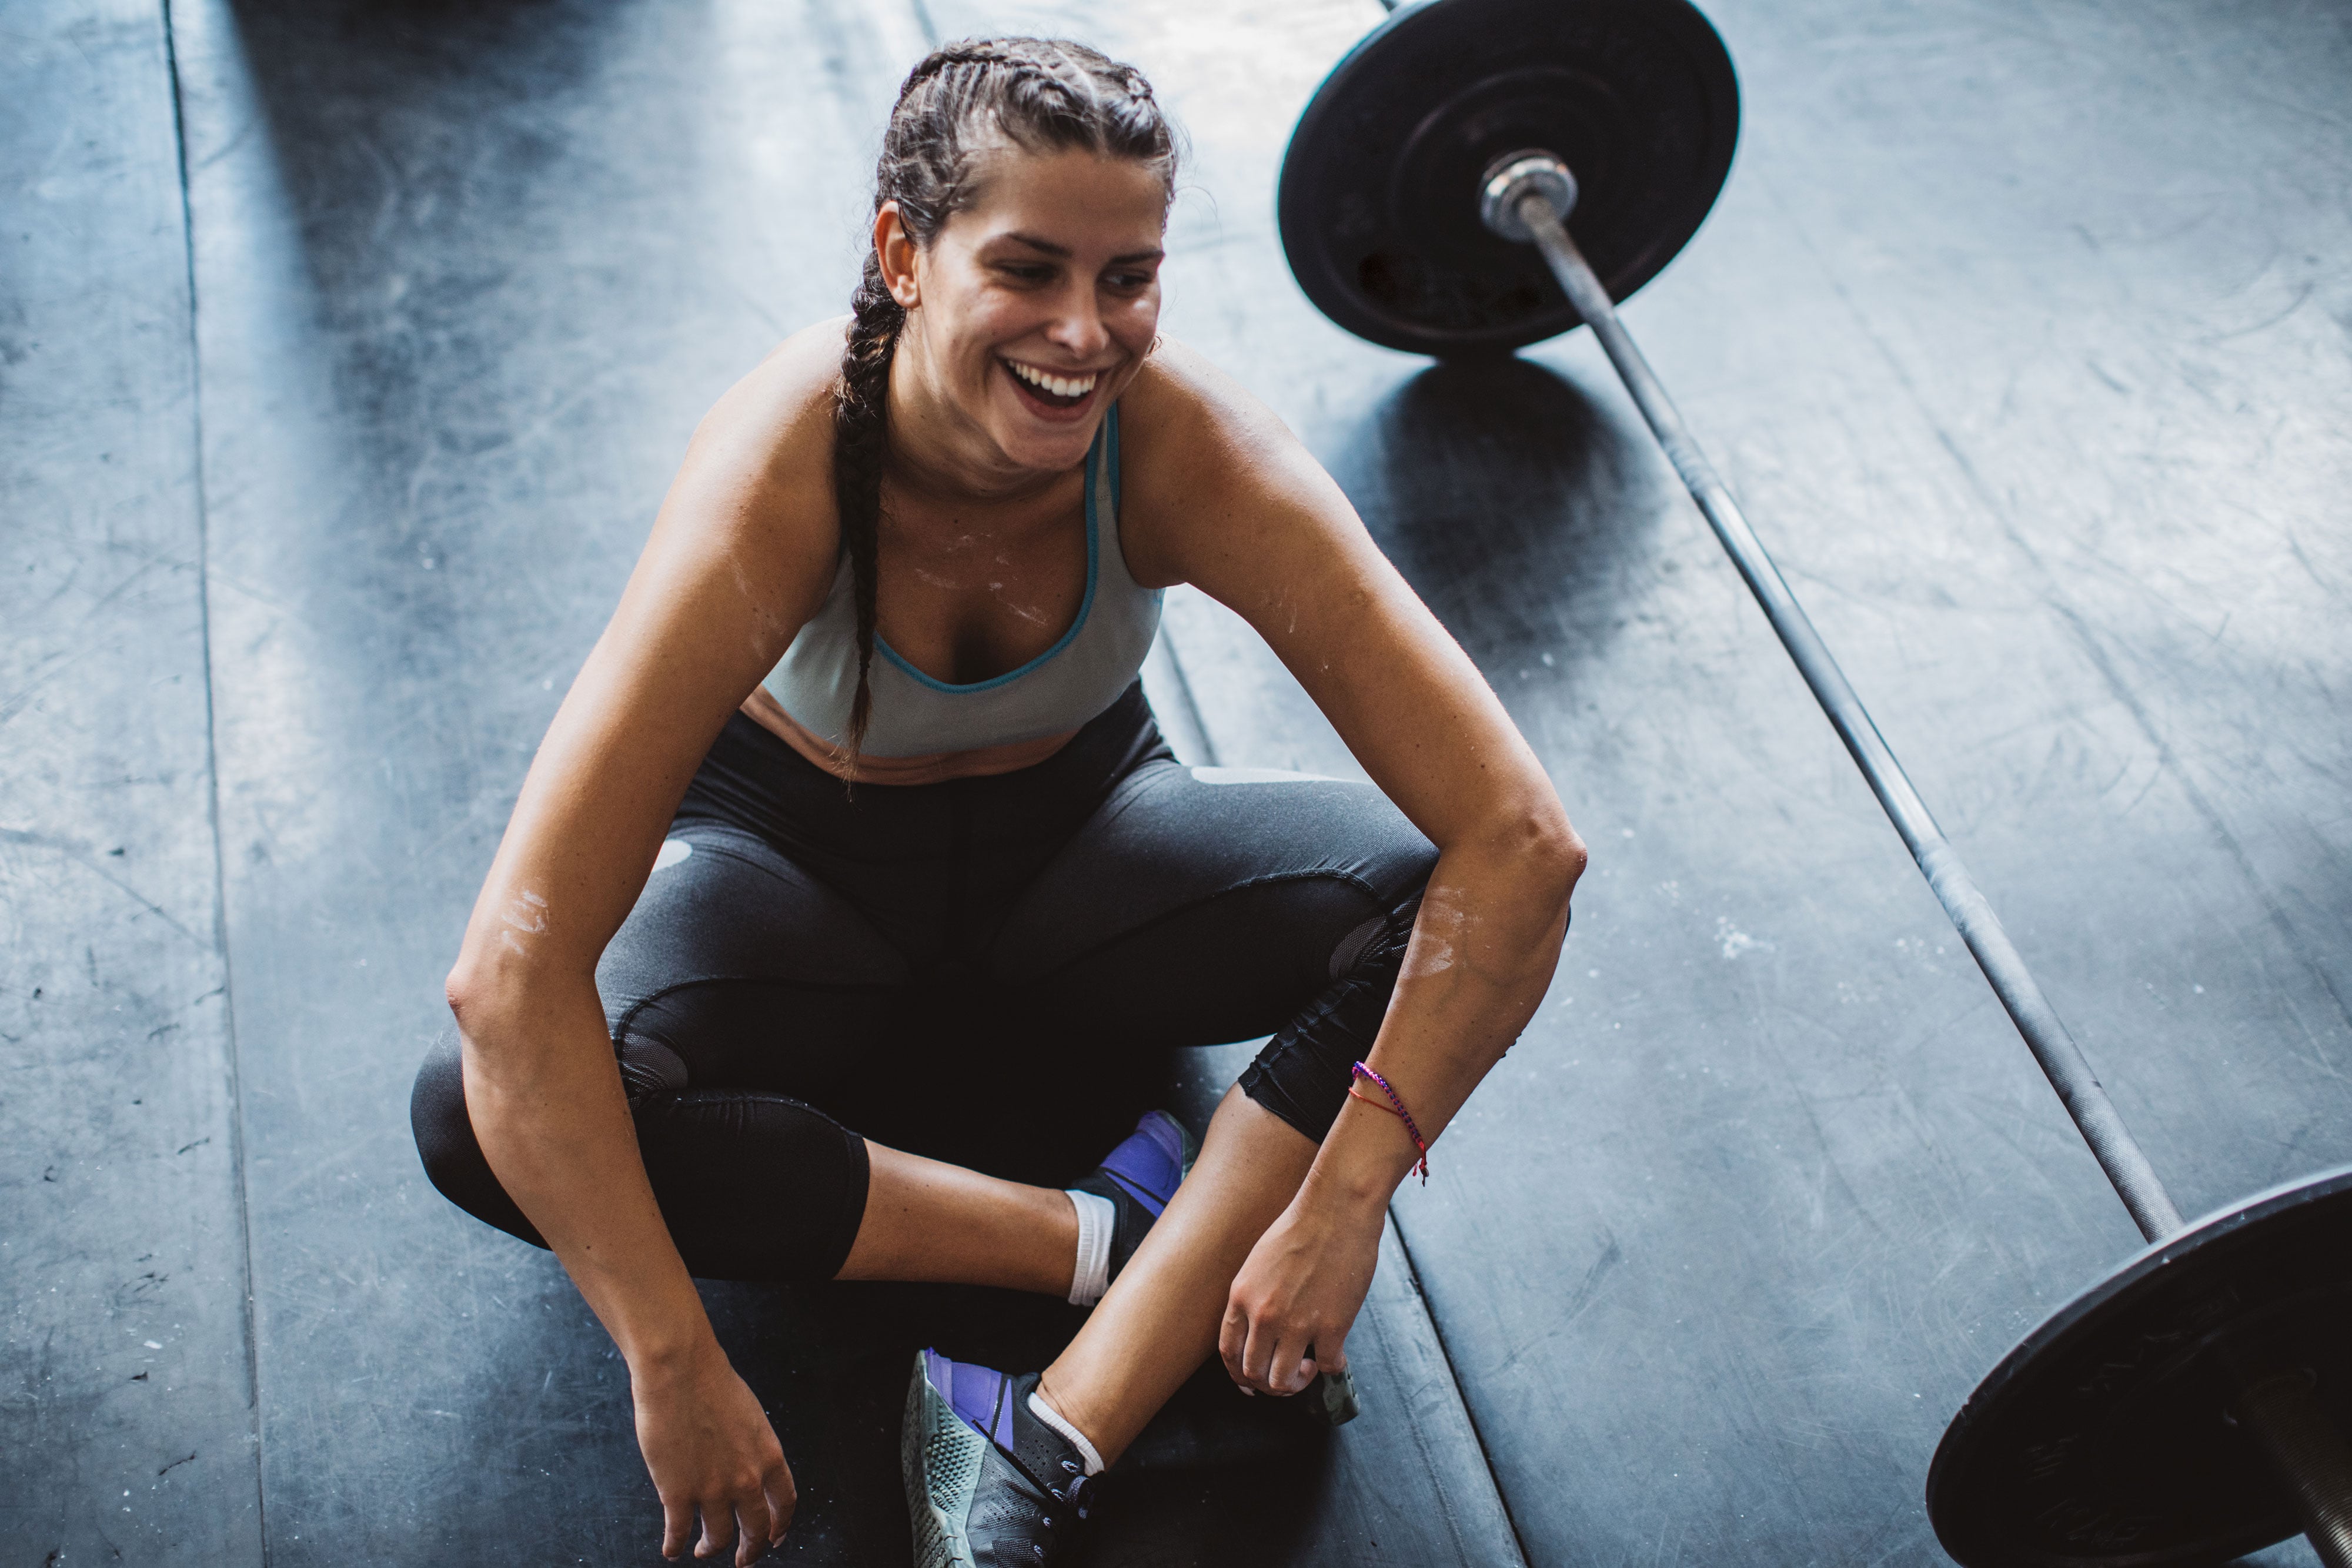 Ask a Swole Woman: What Are the Best Pants for Lifting Weights?